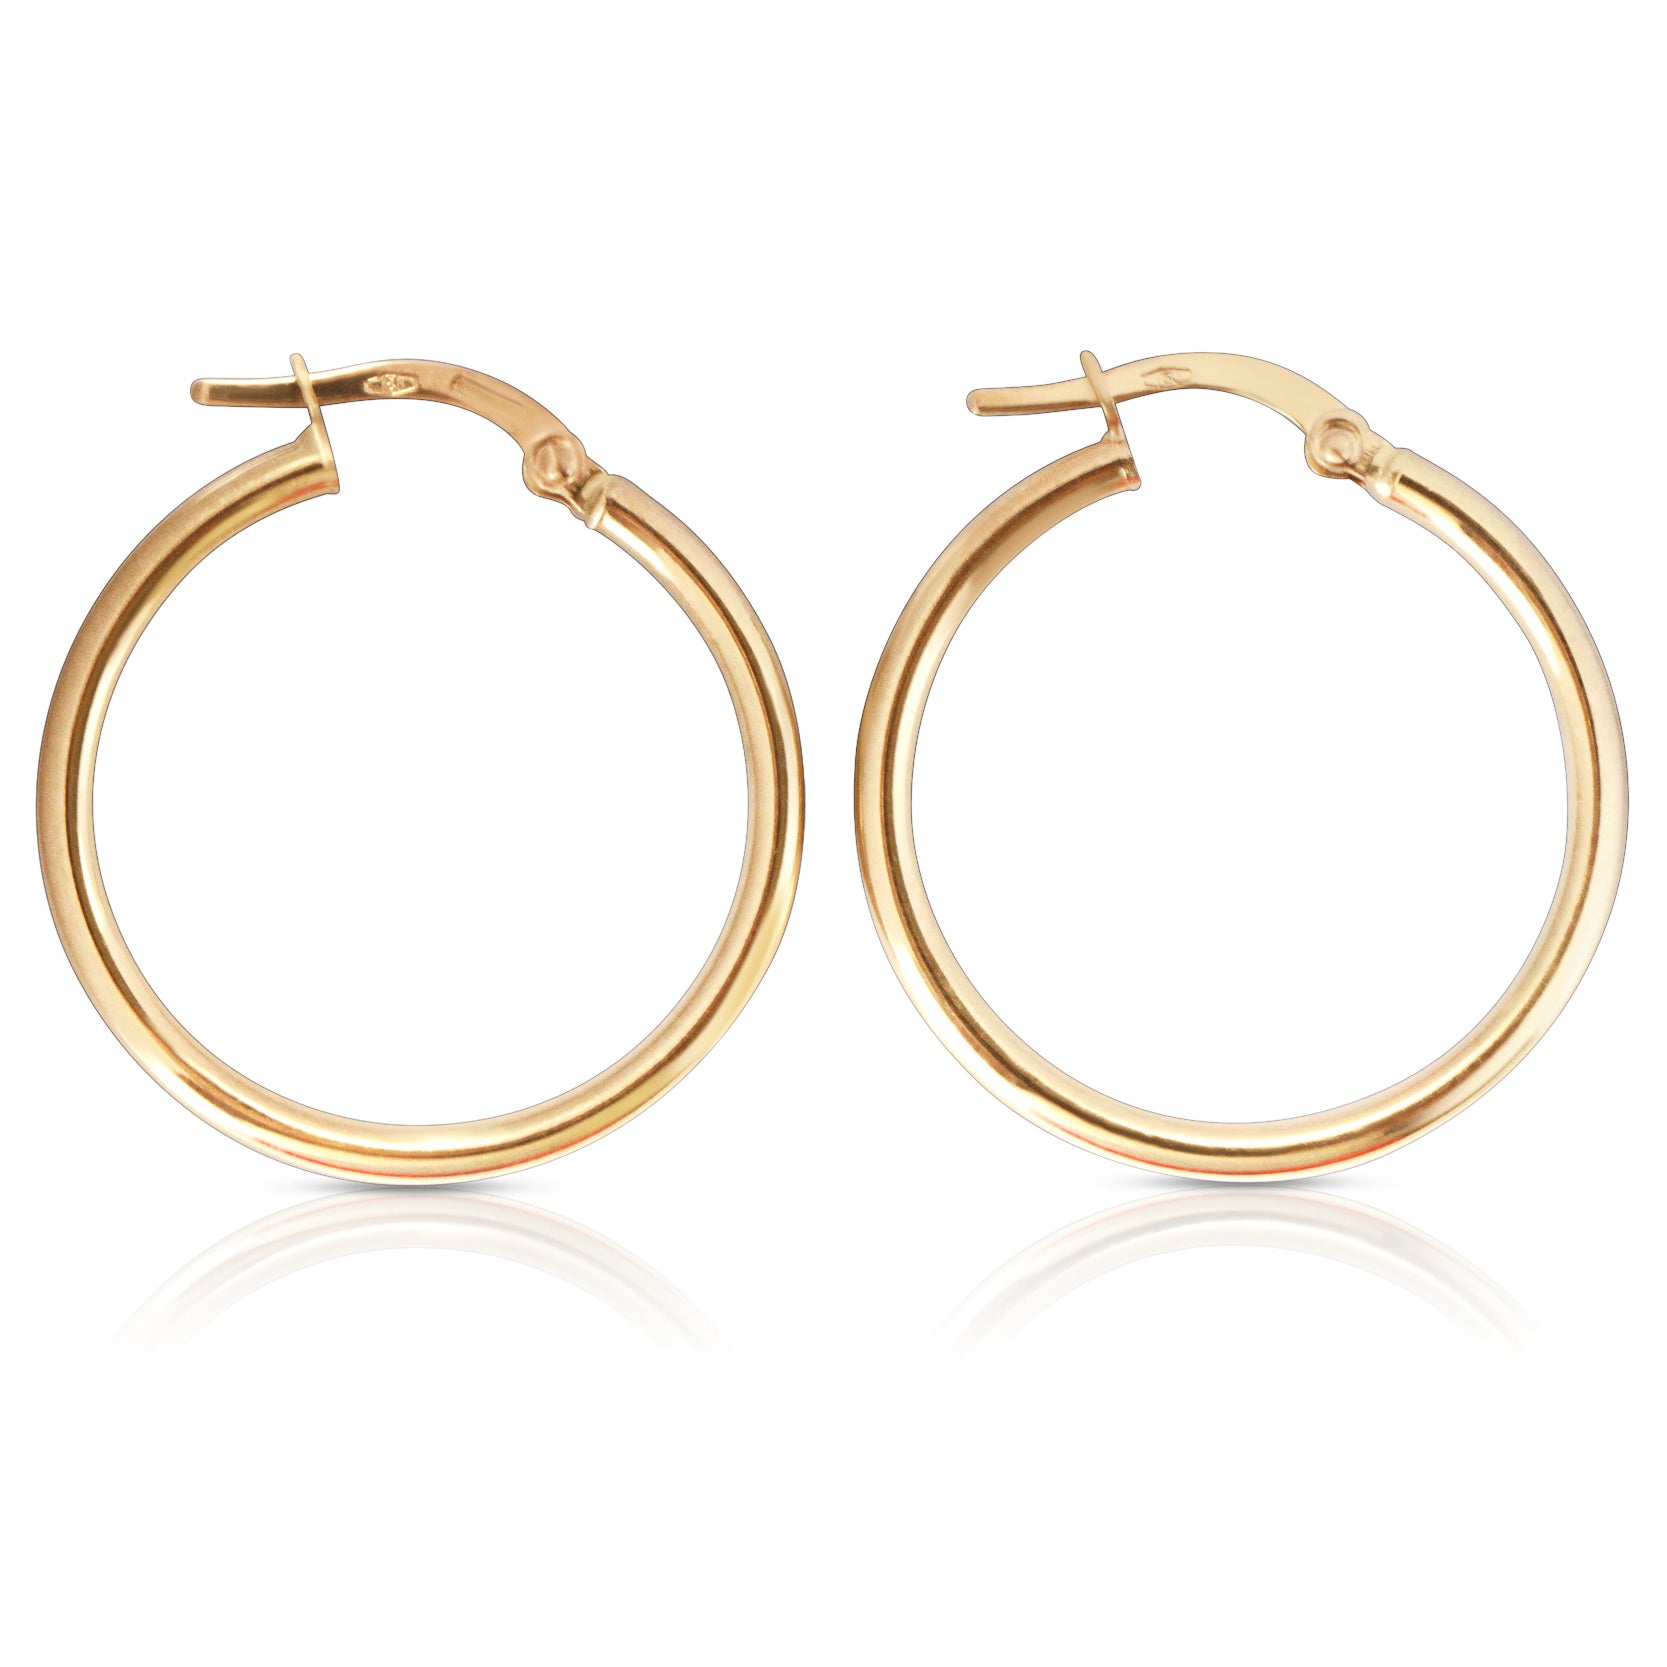 everyday gold hoops earrings, side angle